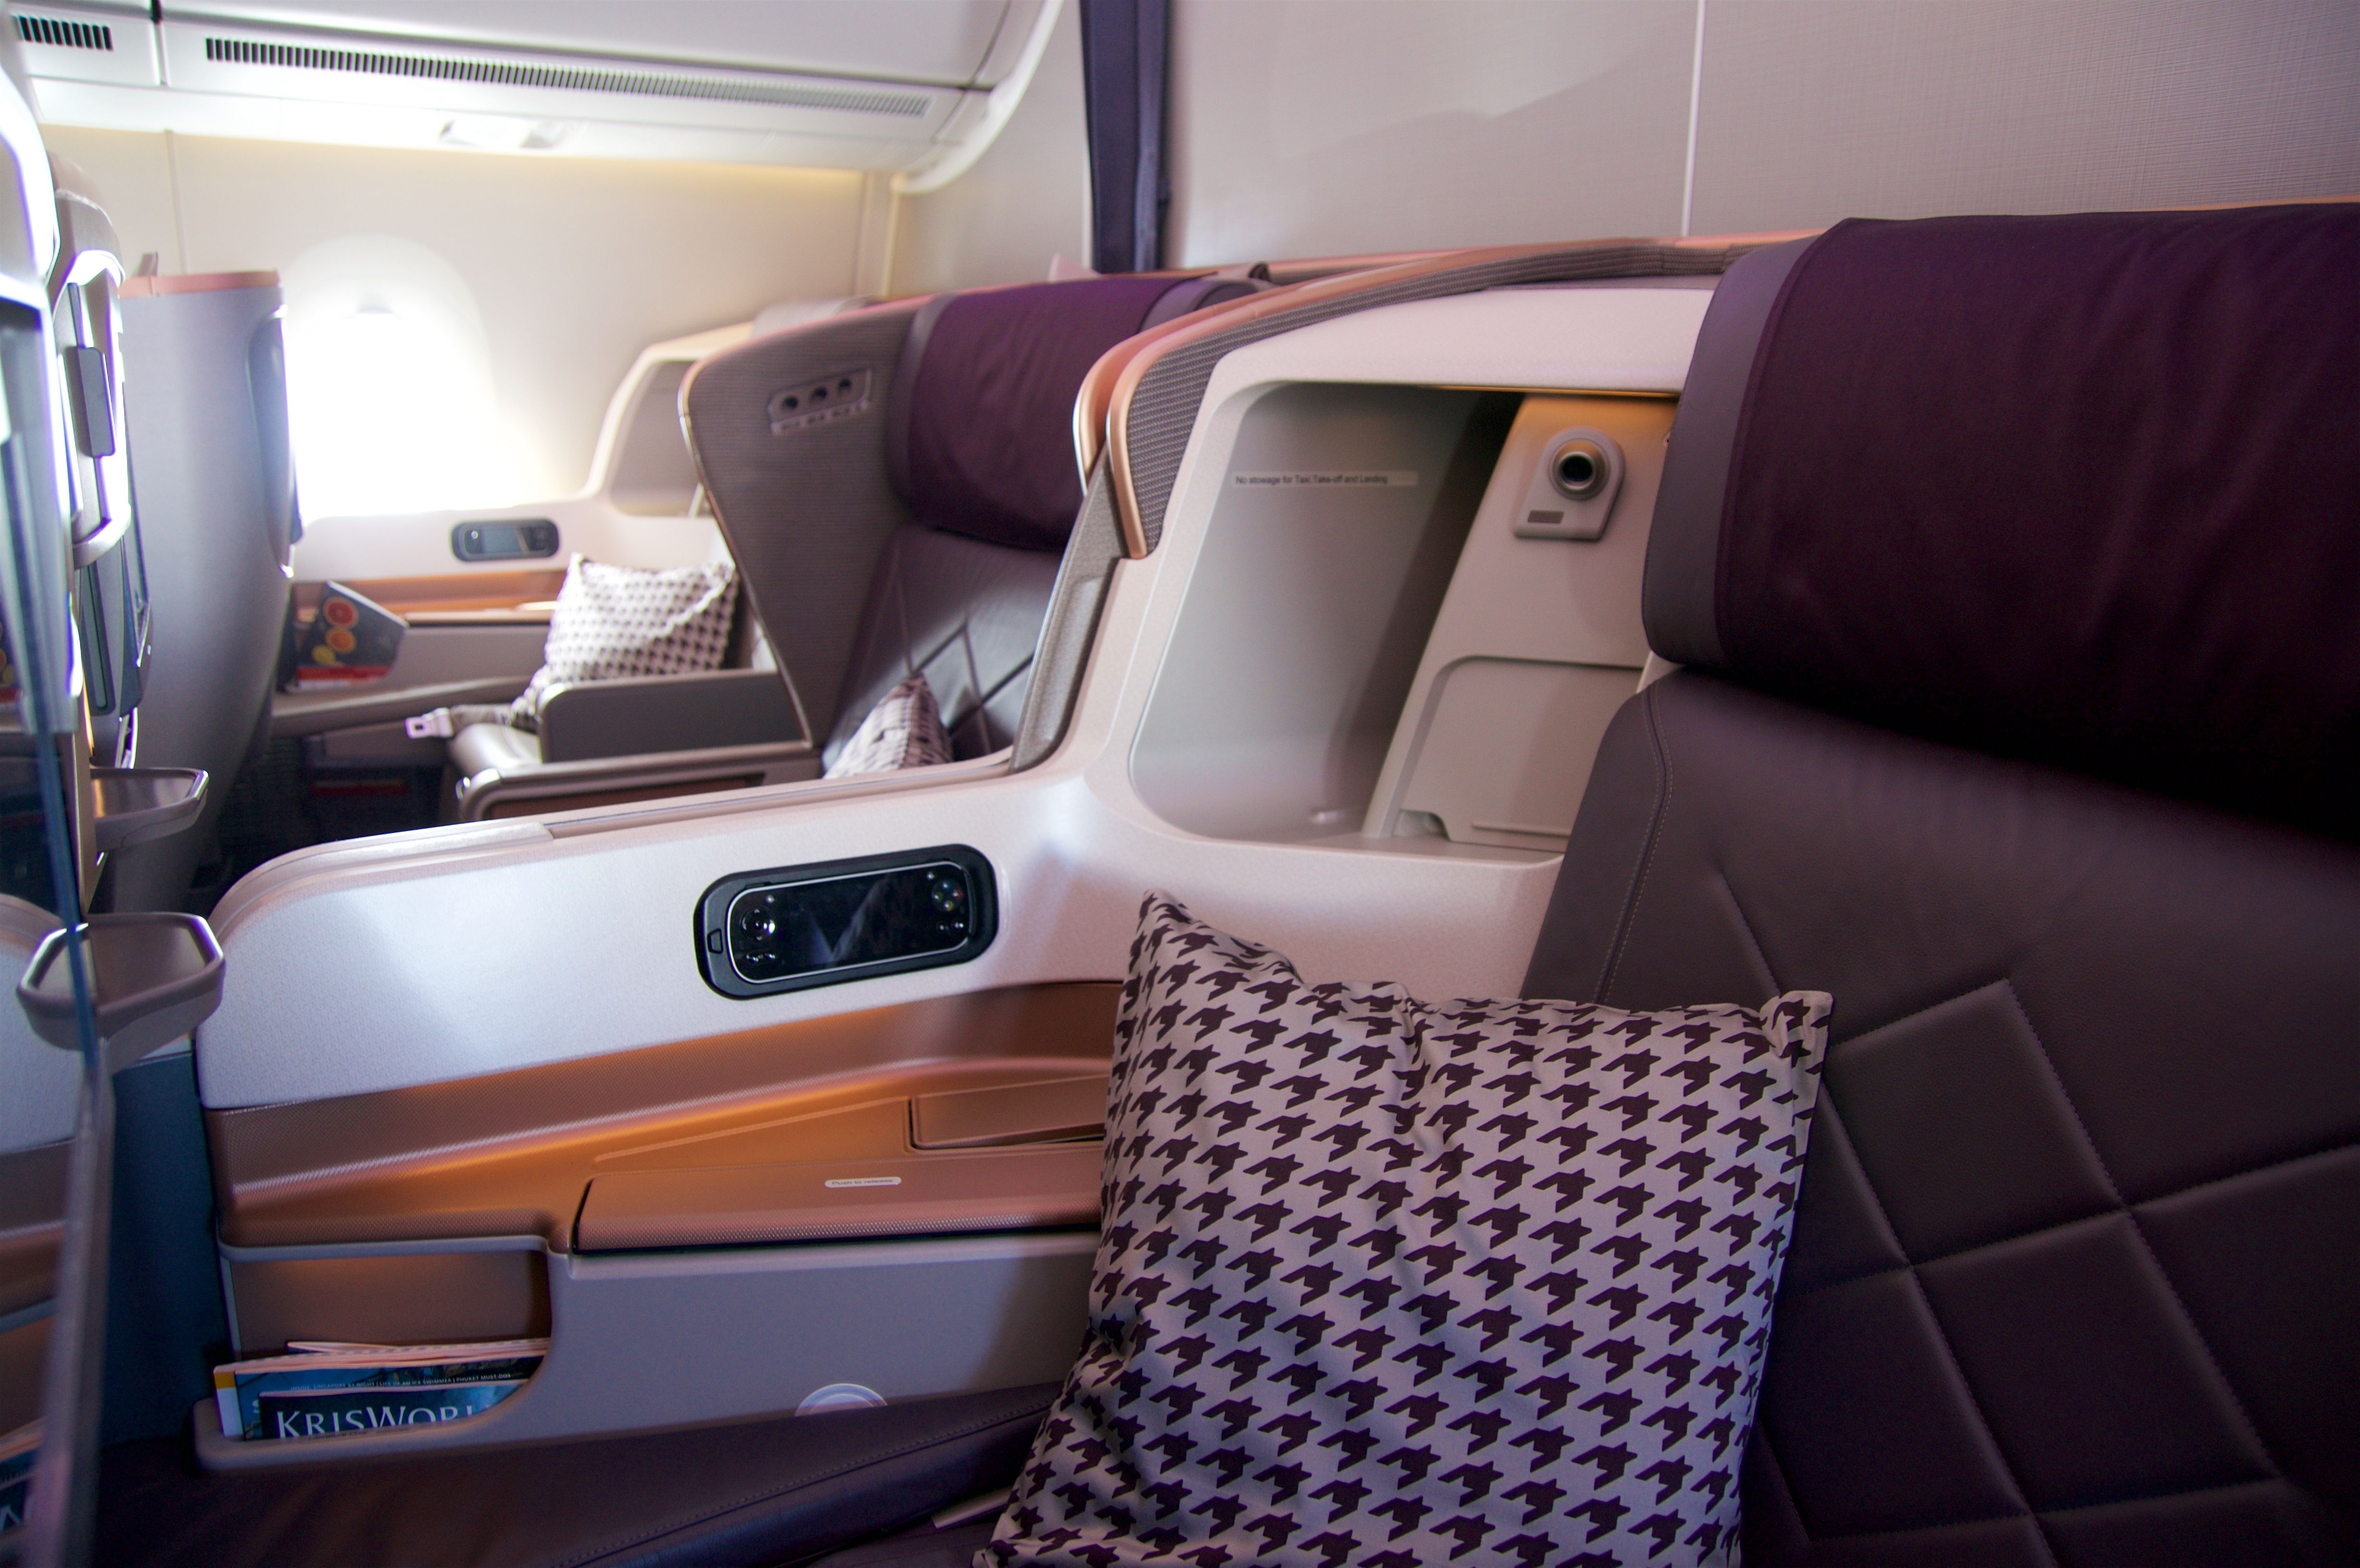 Inside Singapore Airlines A350 Business class cabin.